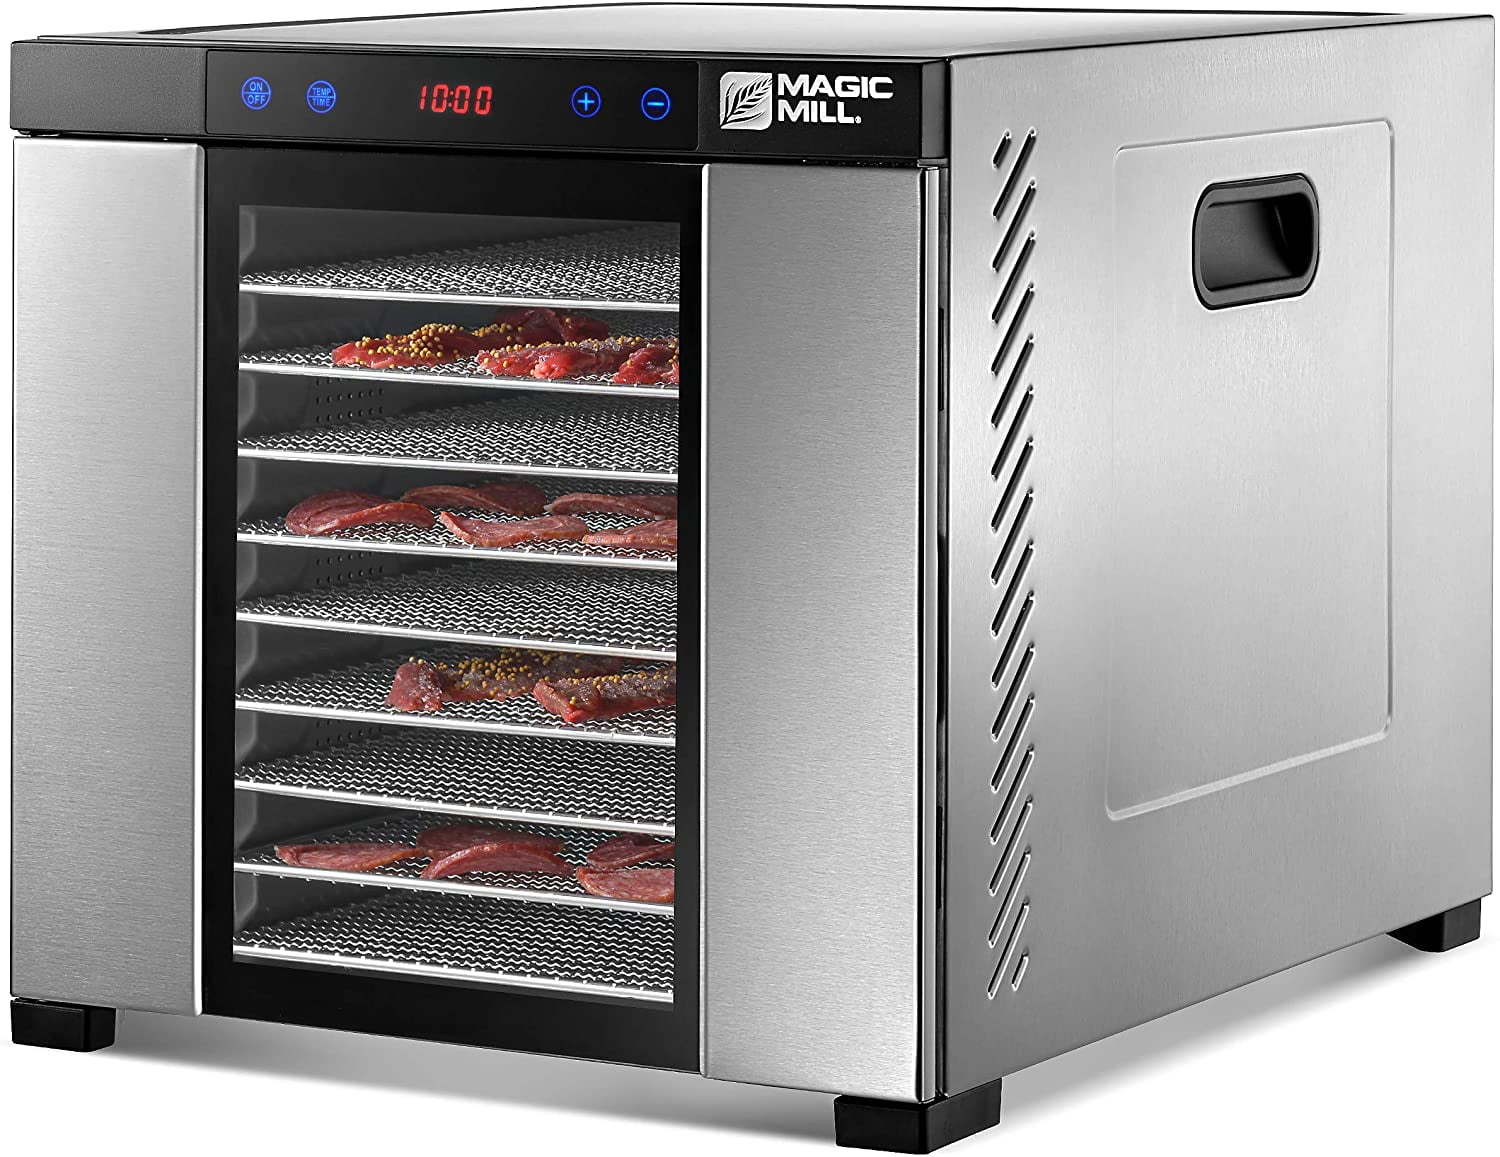 VEVOR Food Dehydrator Machine 6 Stainless Steel Trays 700W Electric Food Dryer w/ Digital Adjustable Timer & Temperature for Jerky Herb Meat Beef